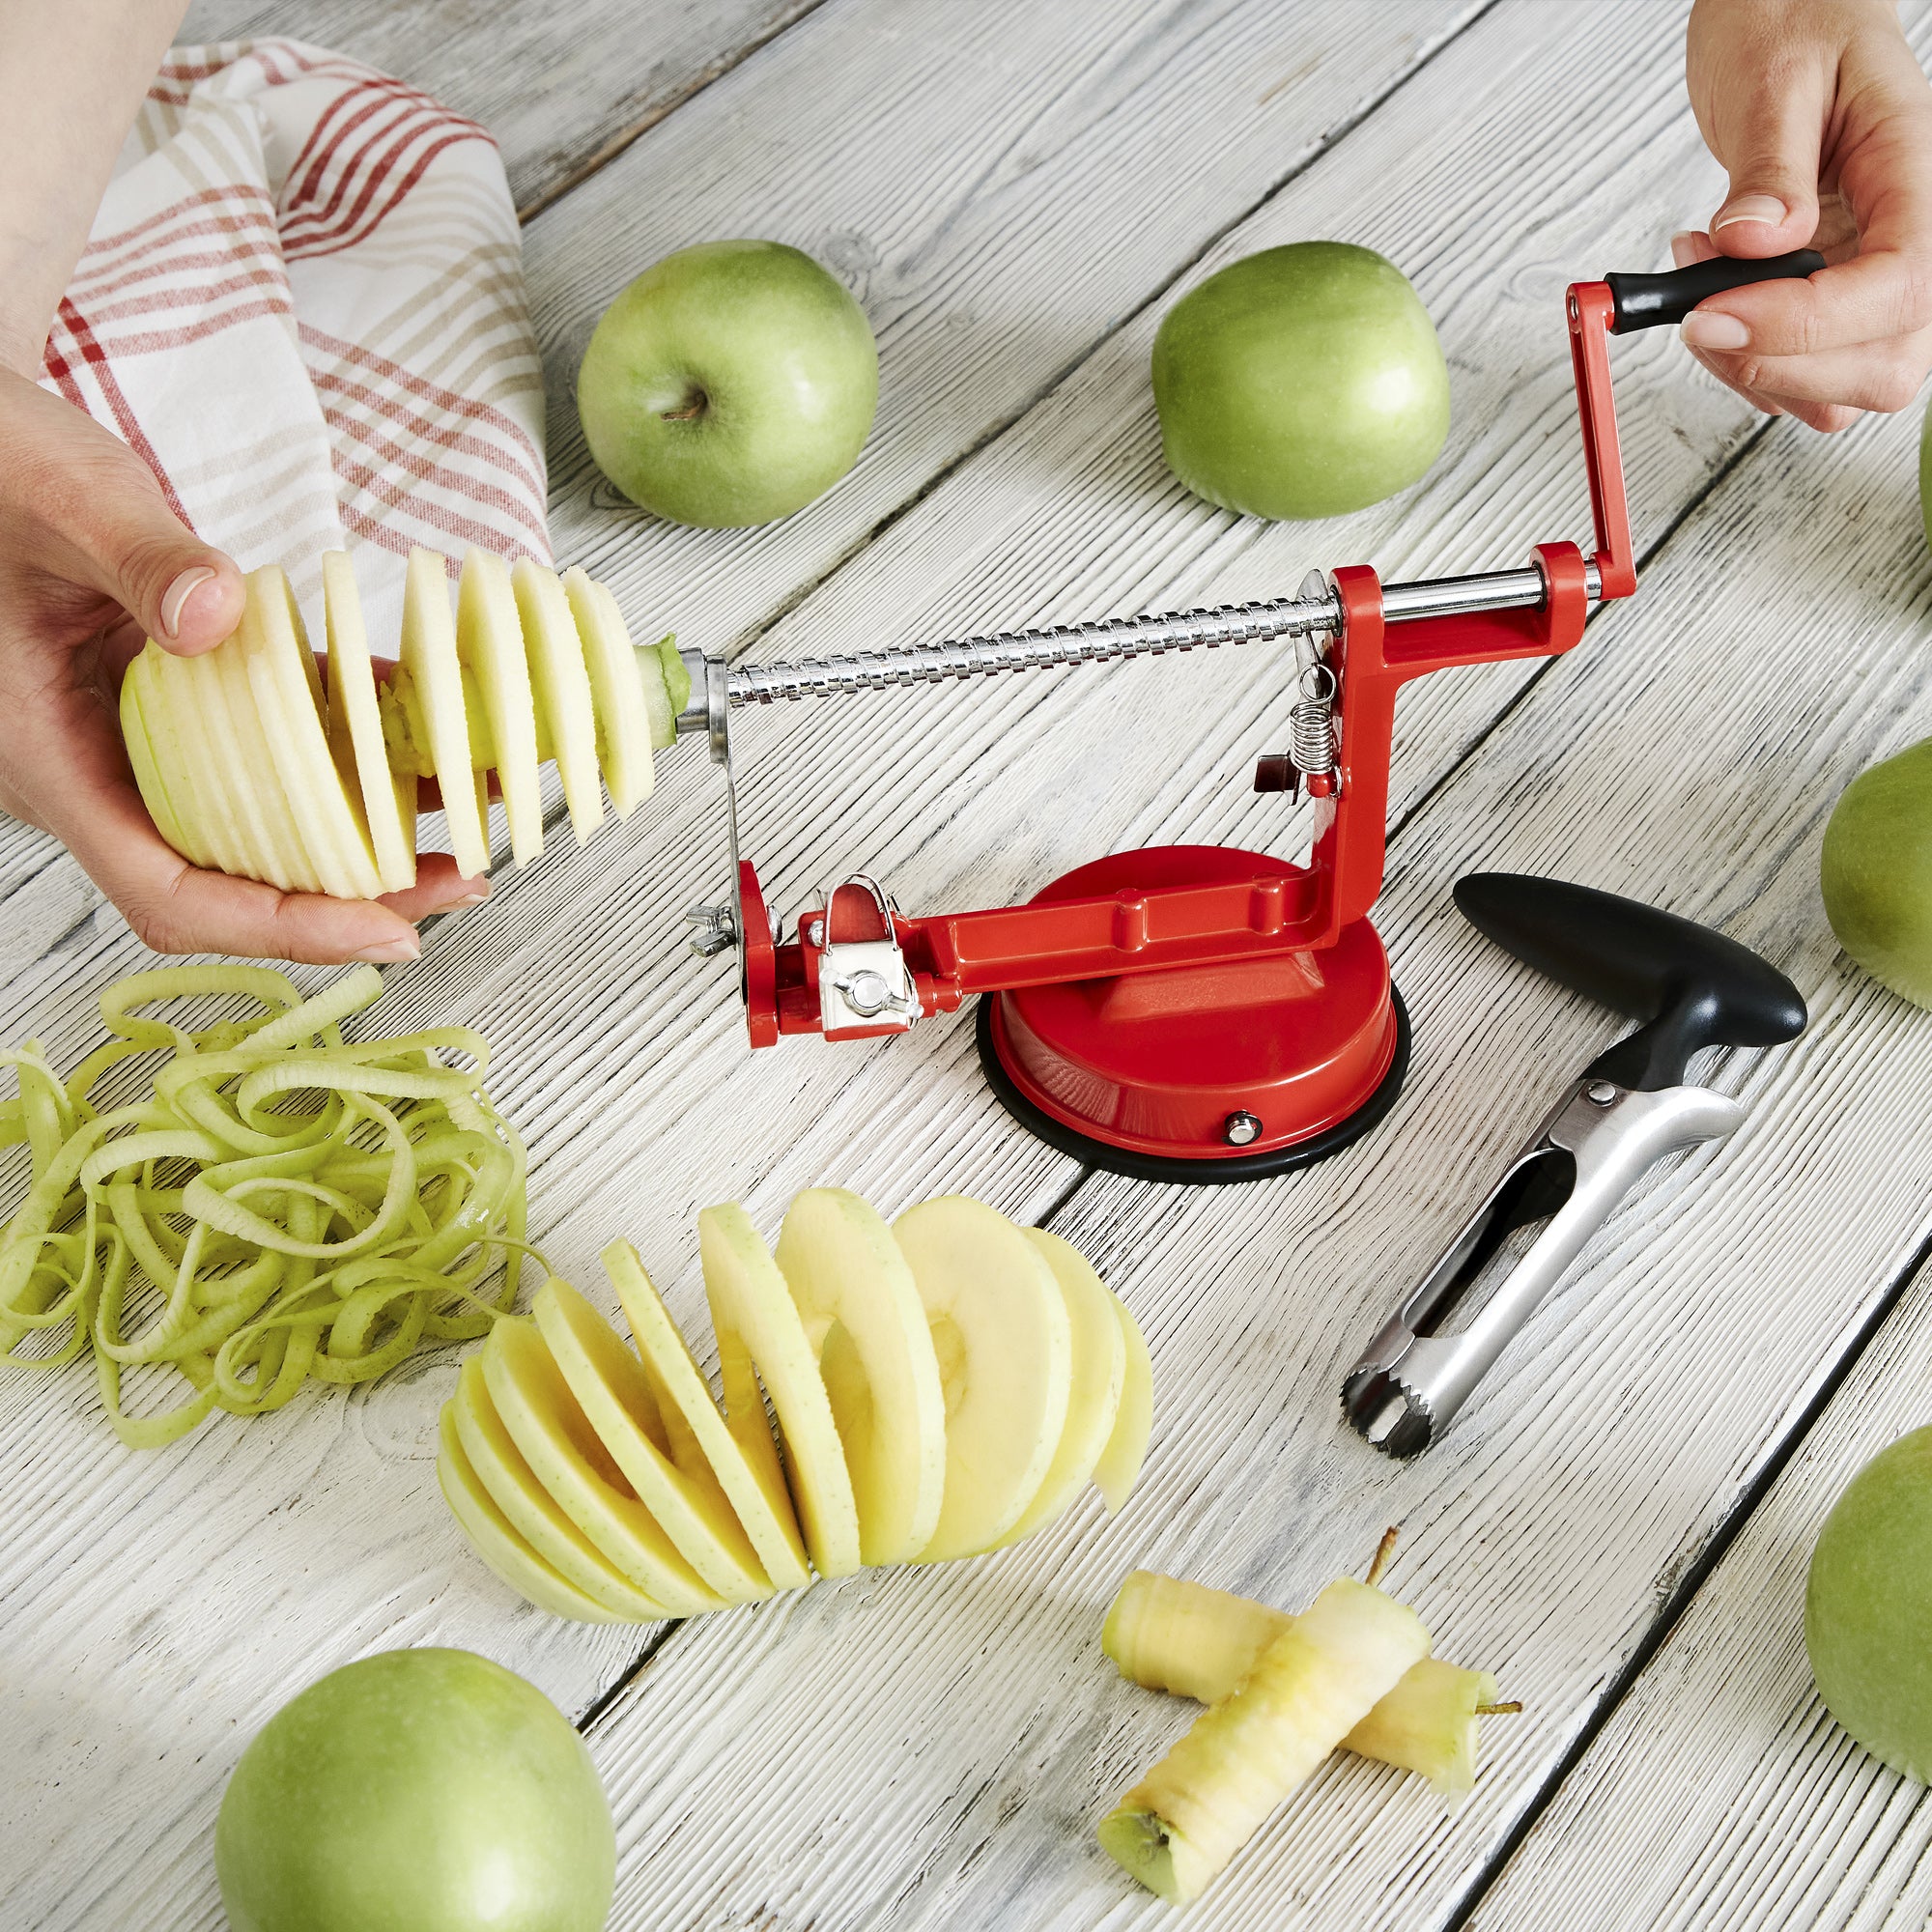 Apple Peeler - Quickly Peel All Your Fruits and Veggies 